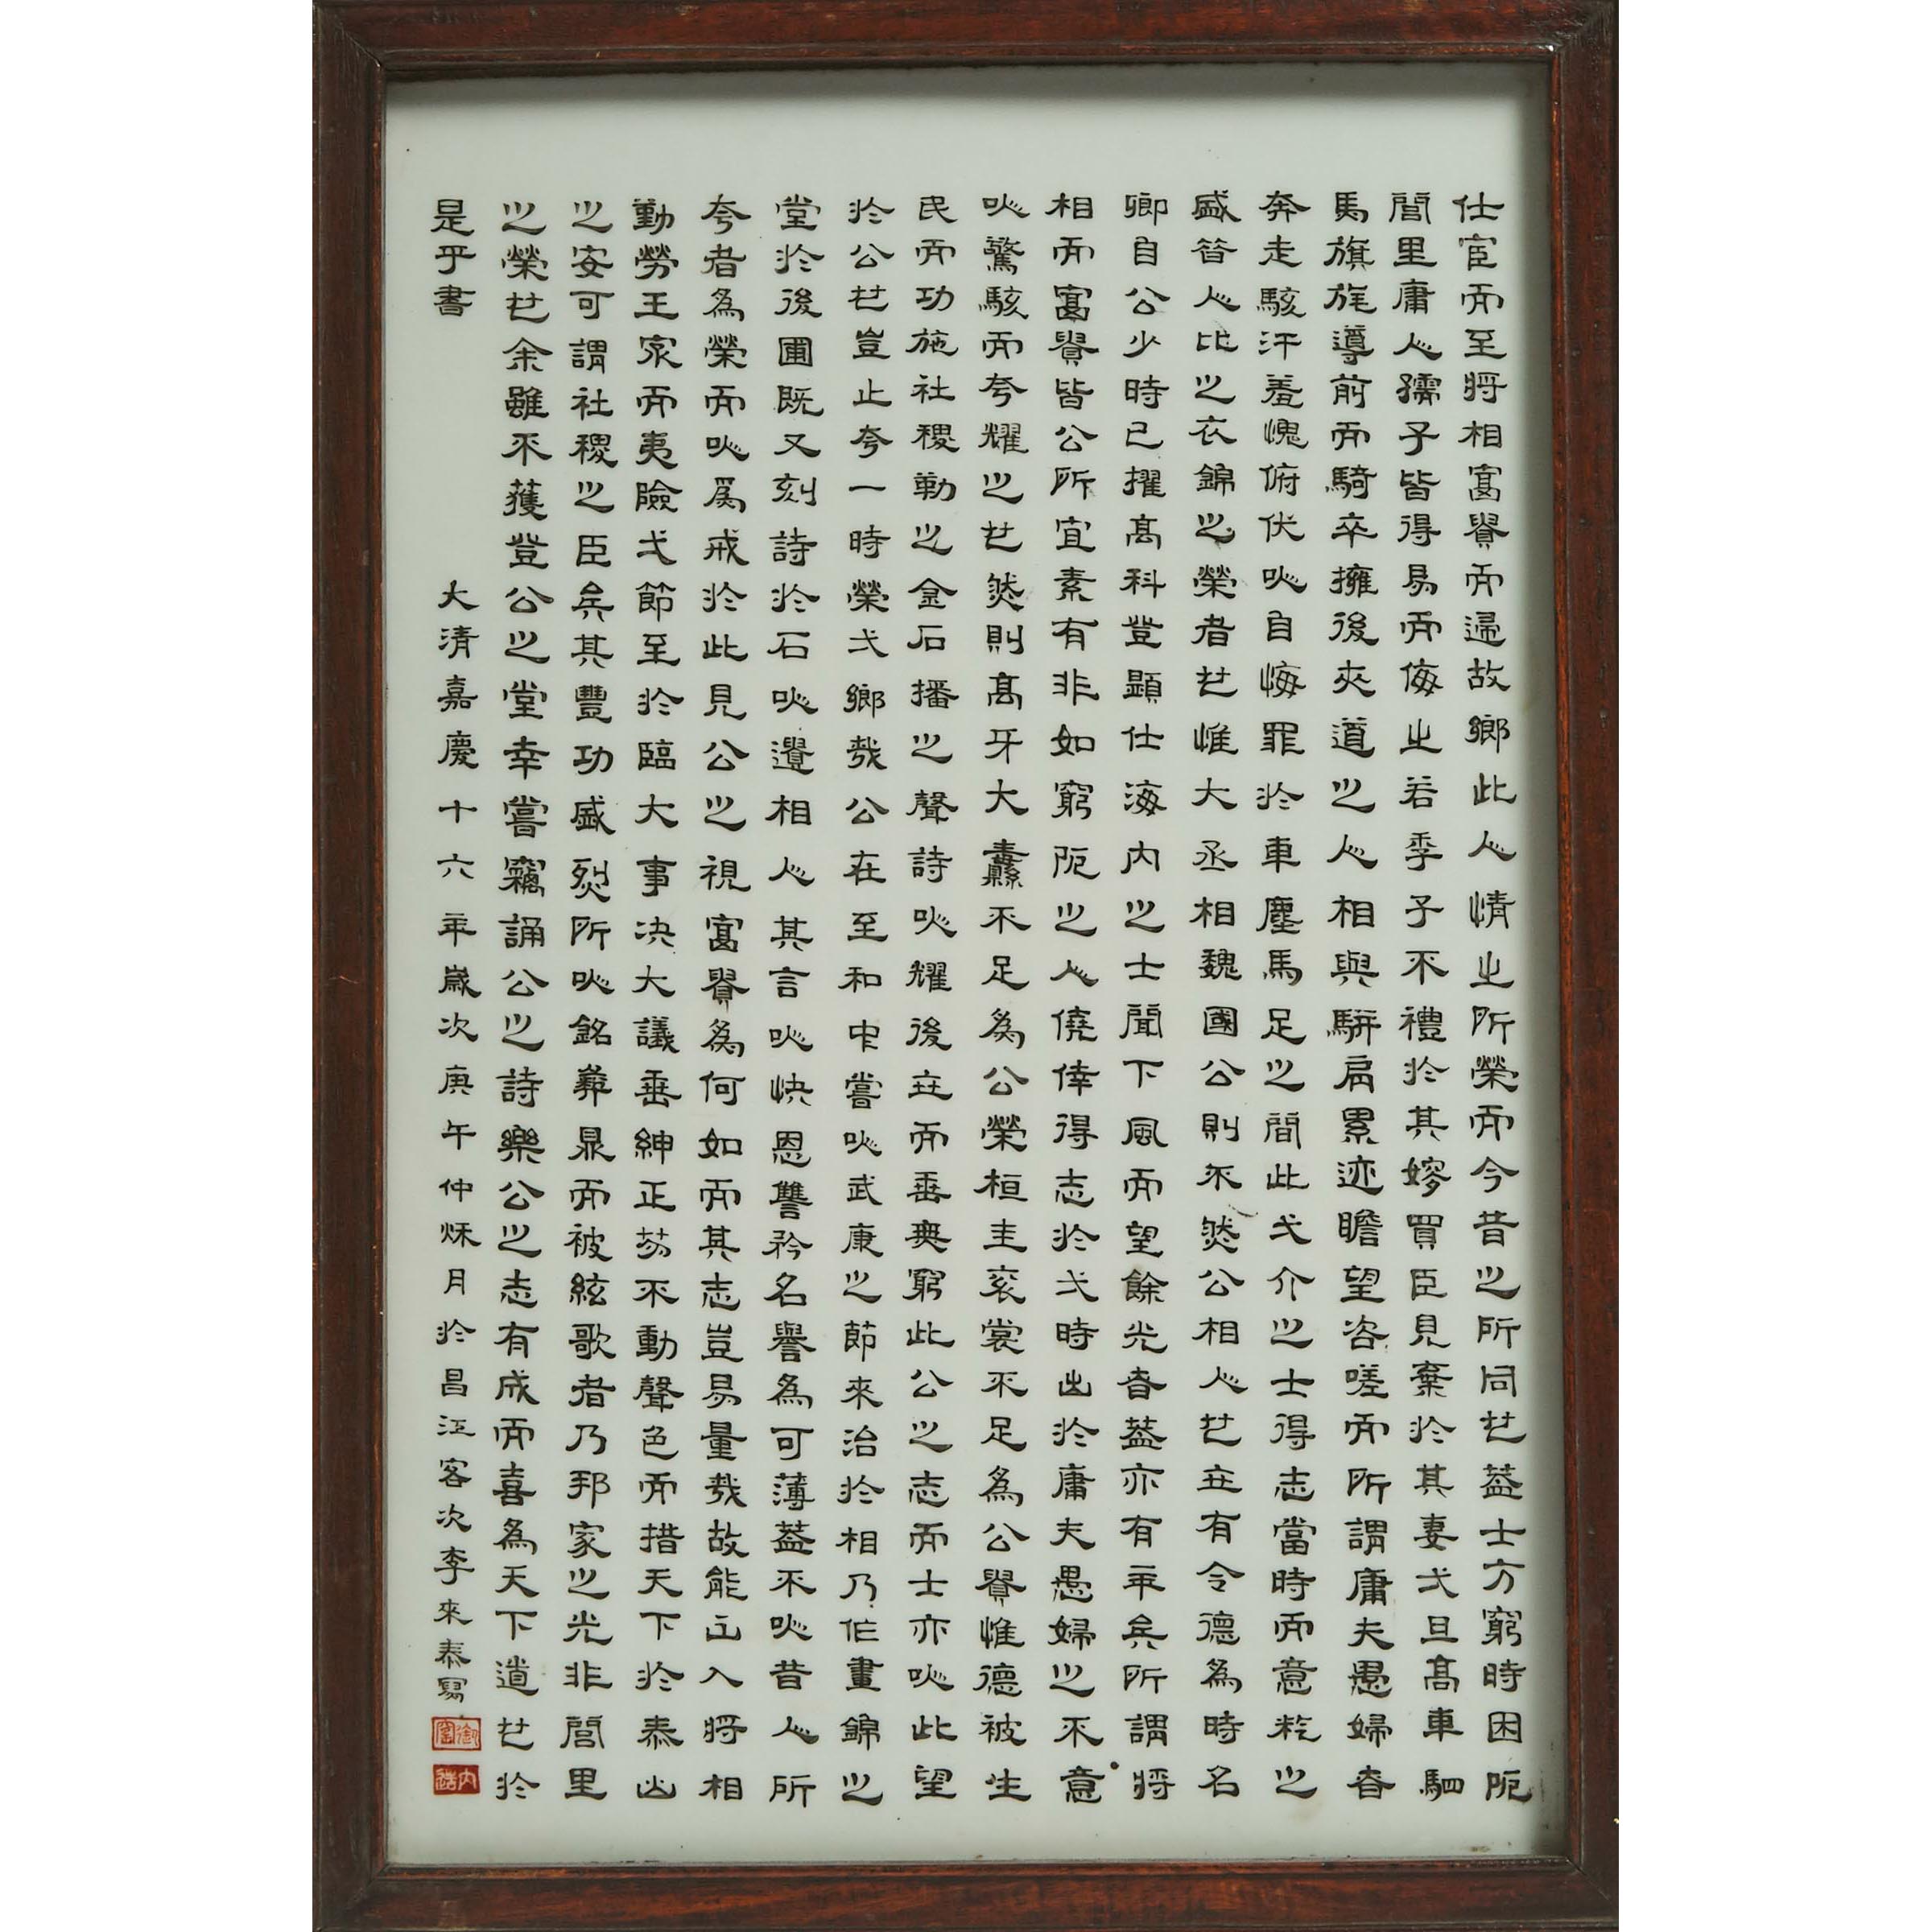 An Inscribed Porcelain Plaque, Dated